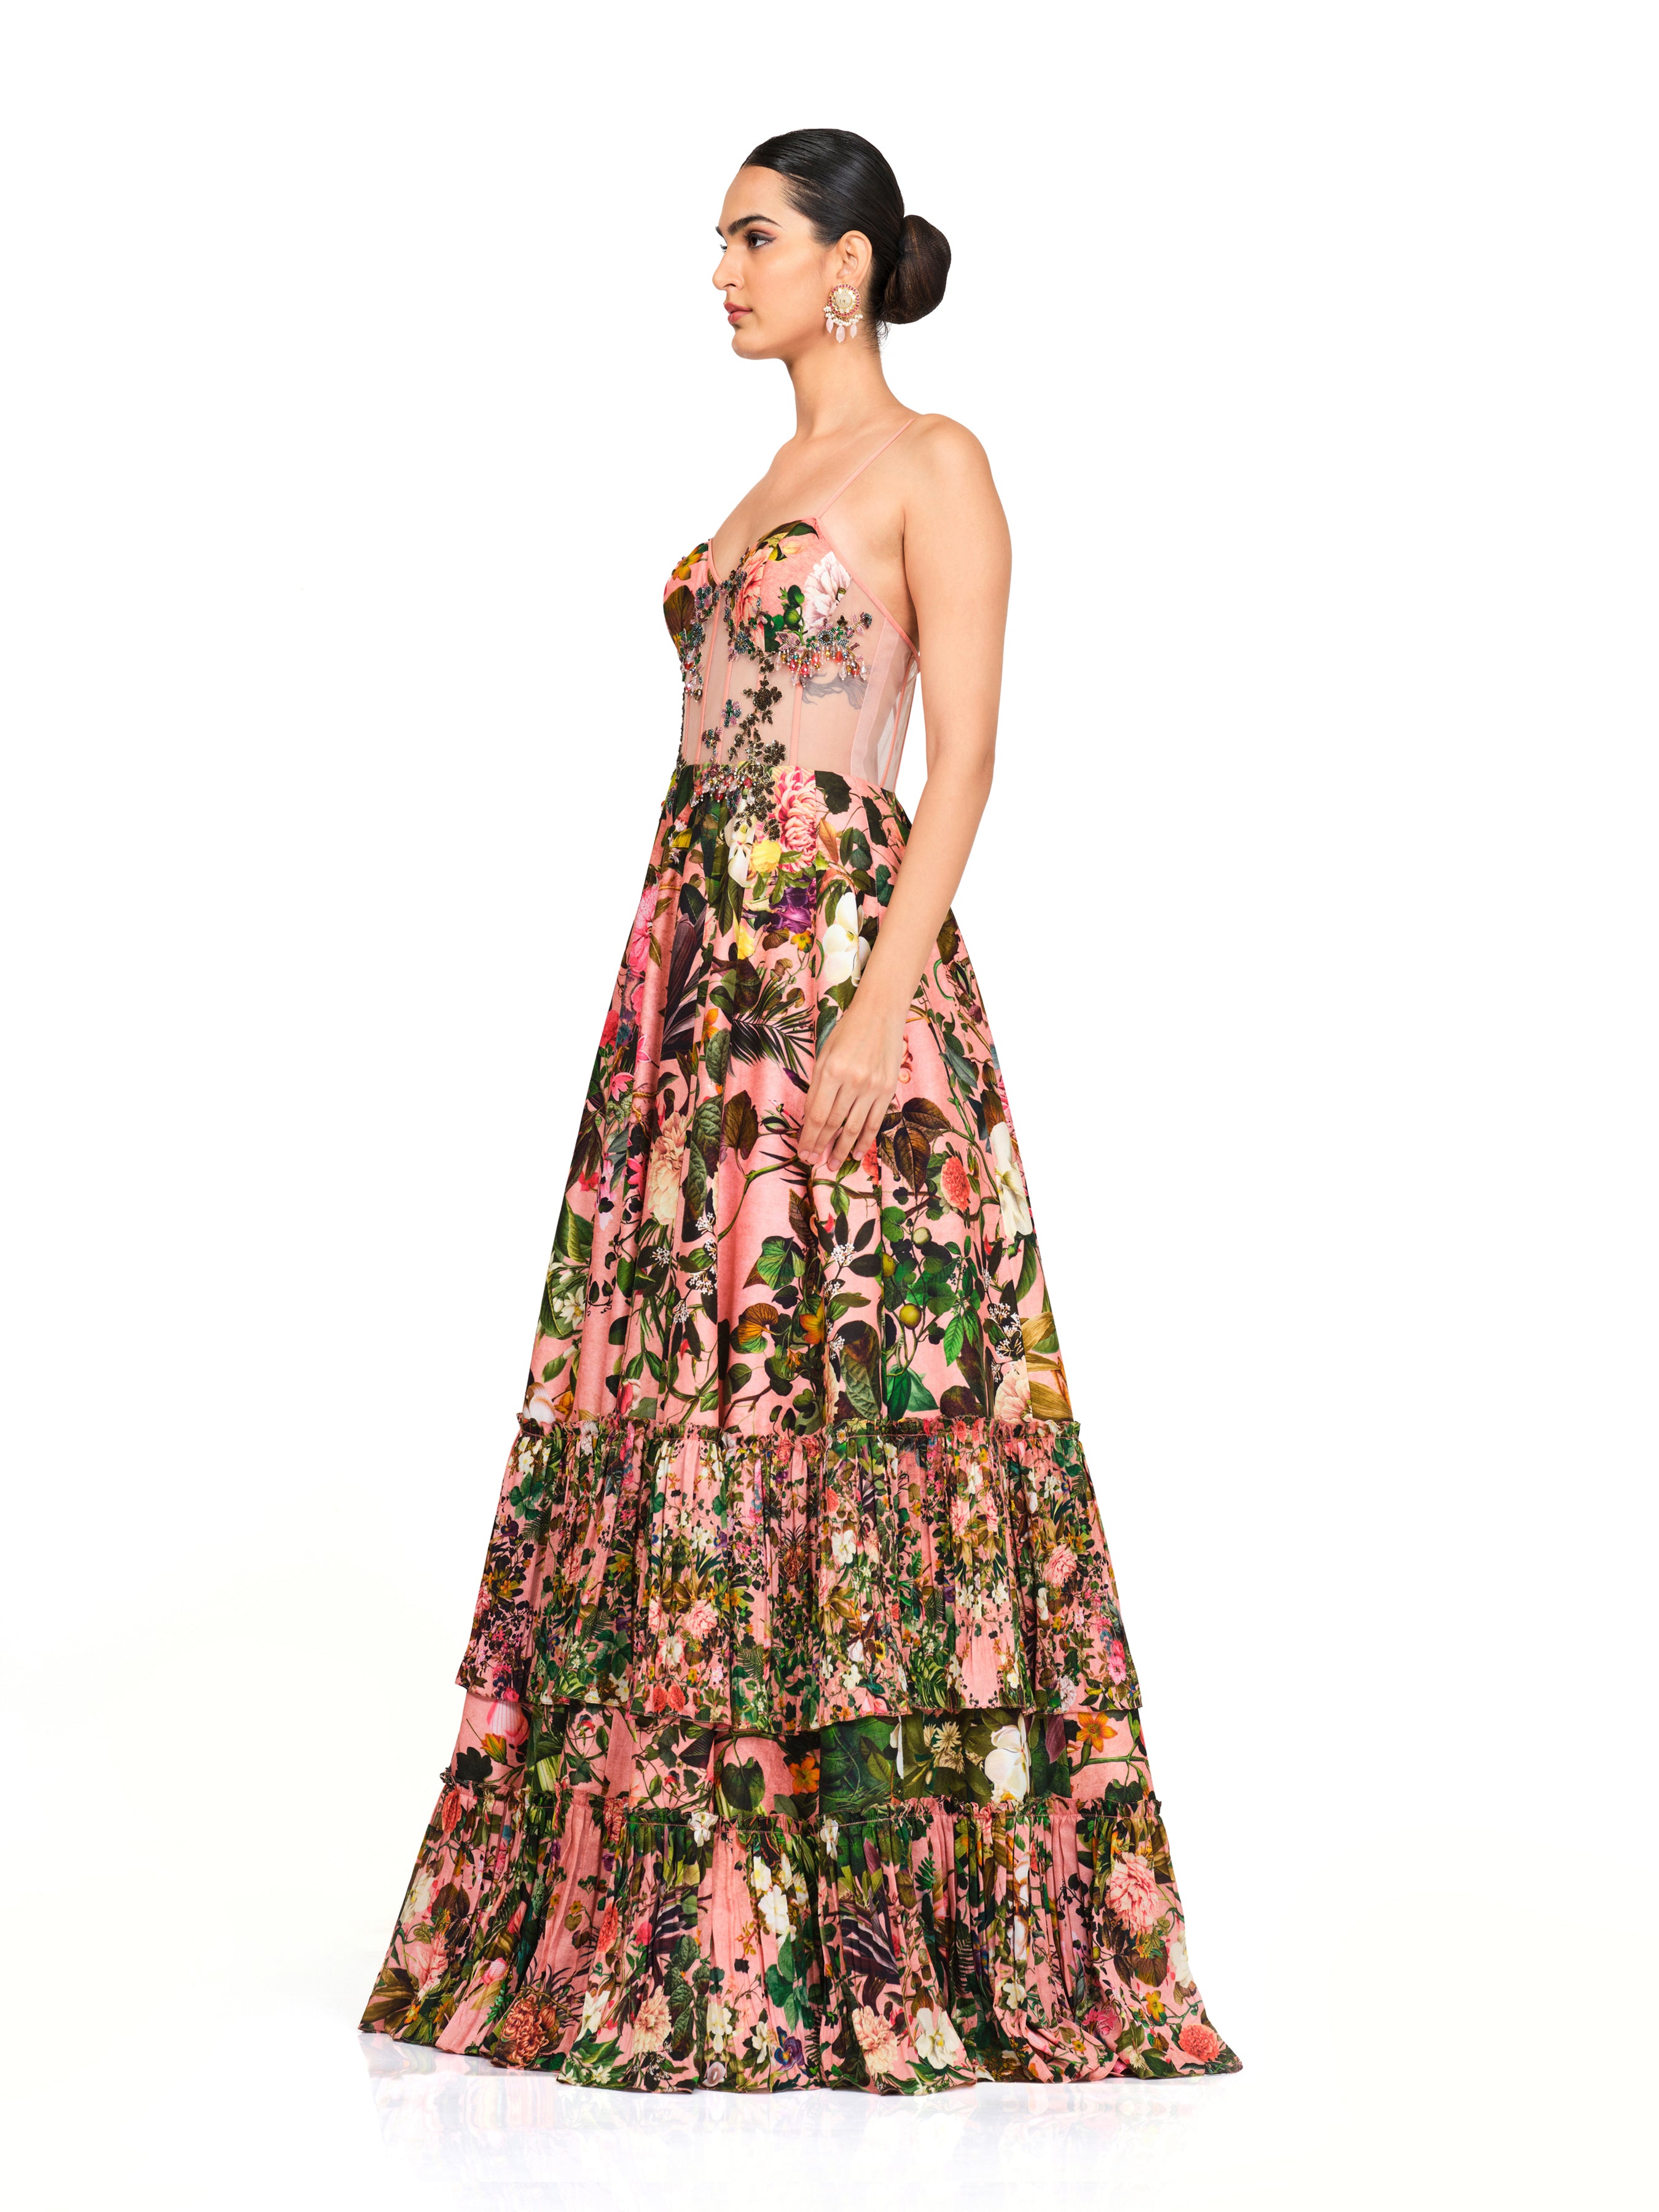 Printed Corset Gown With Appliqué Work